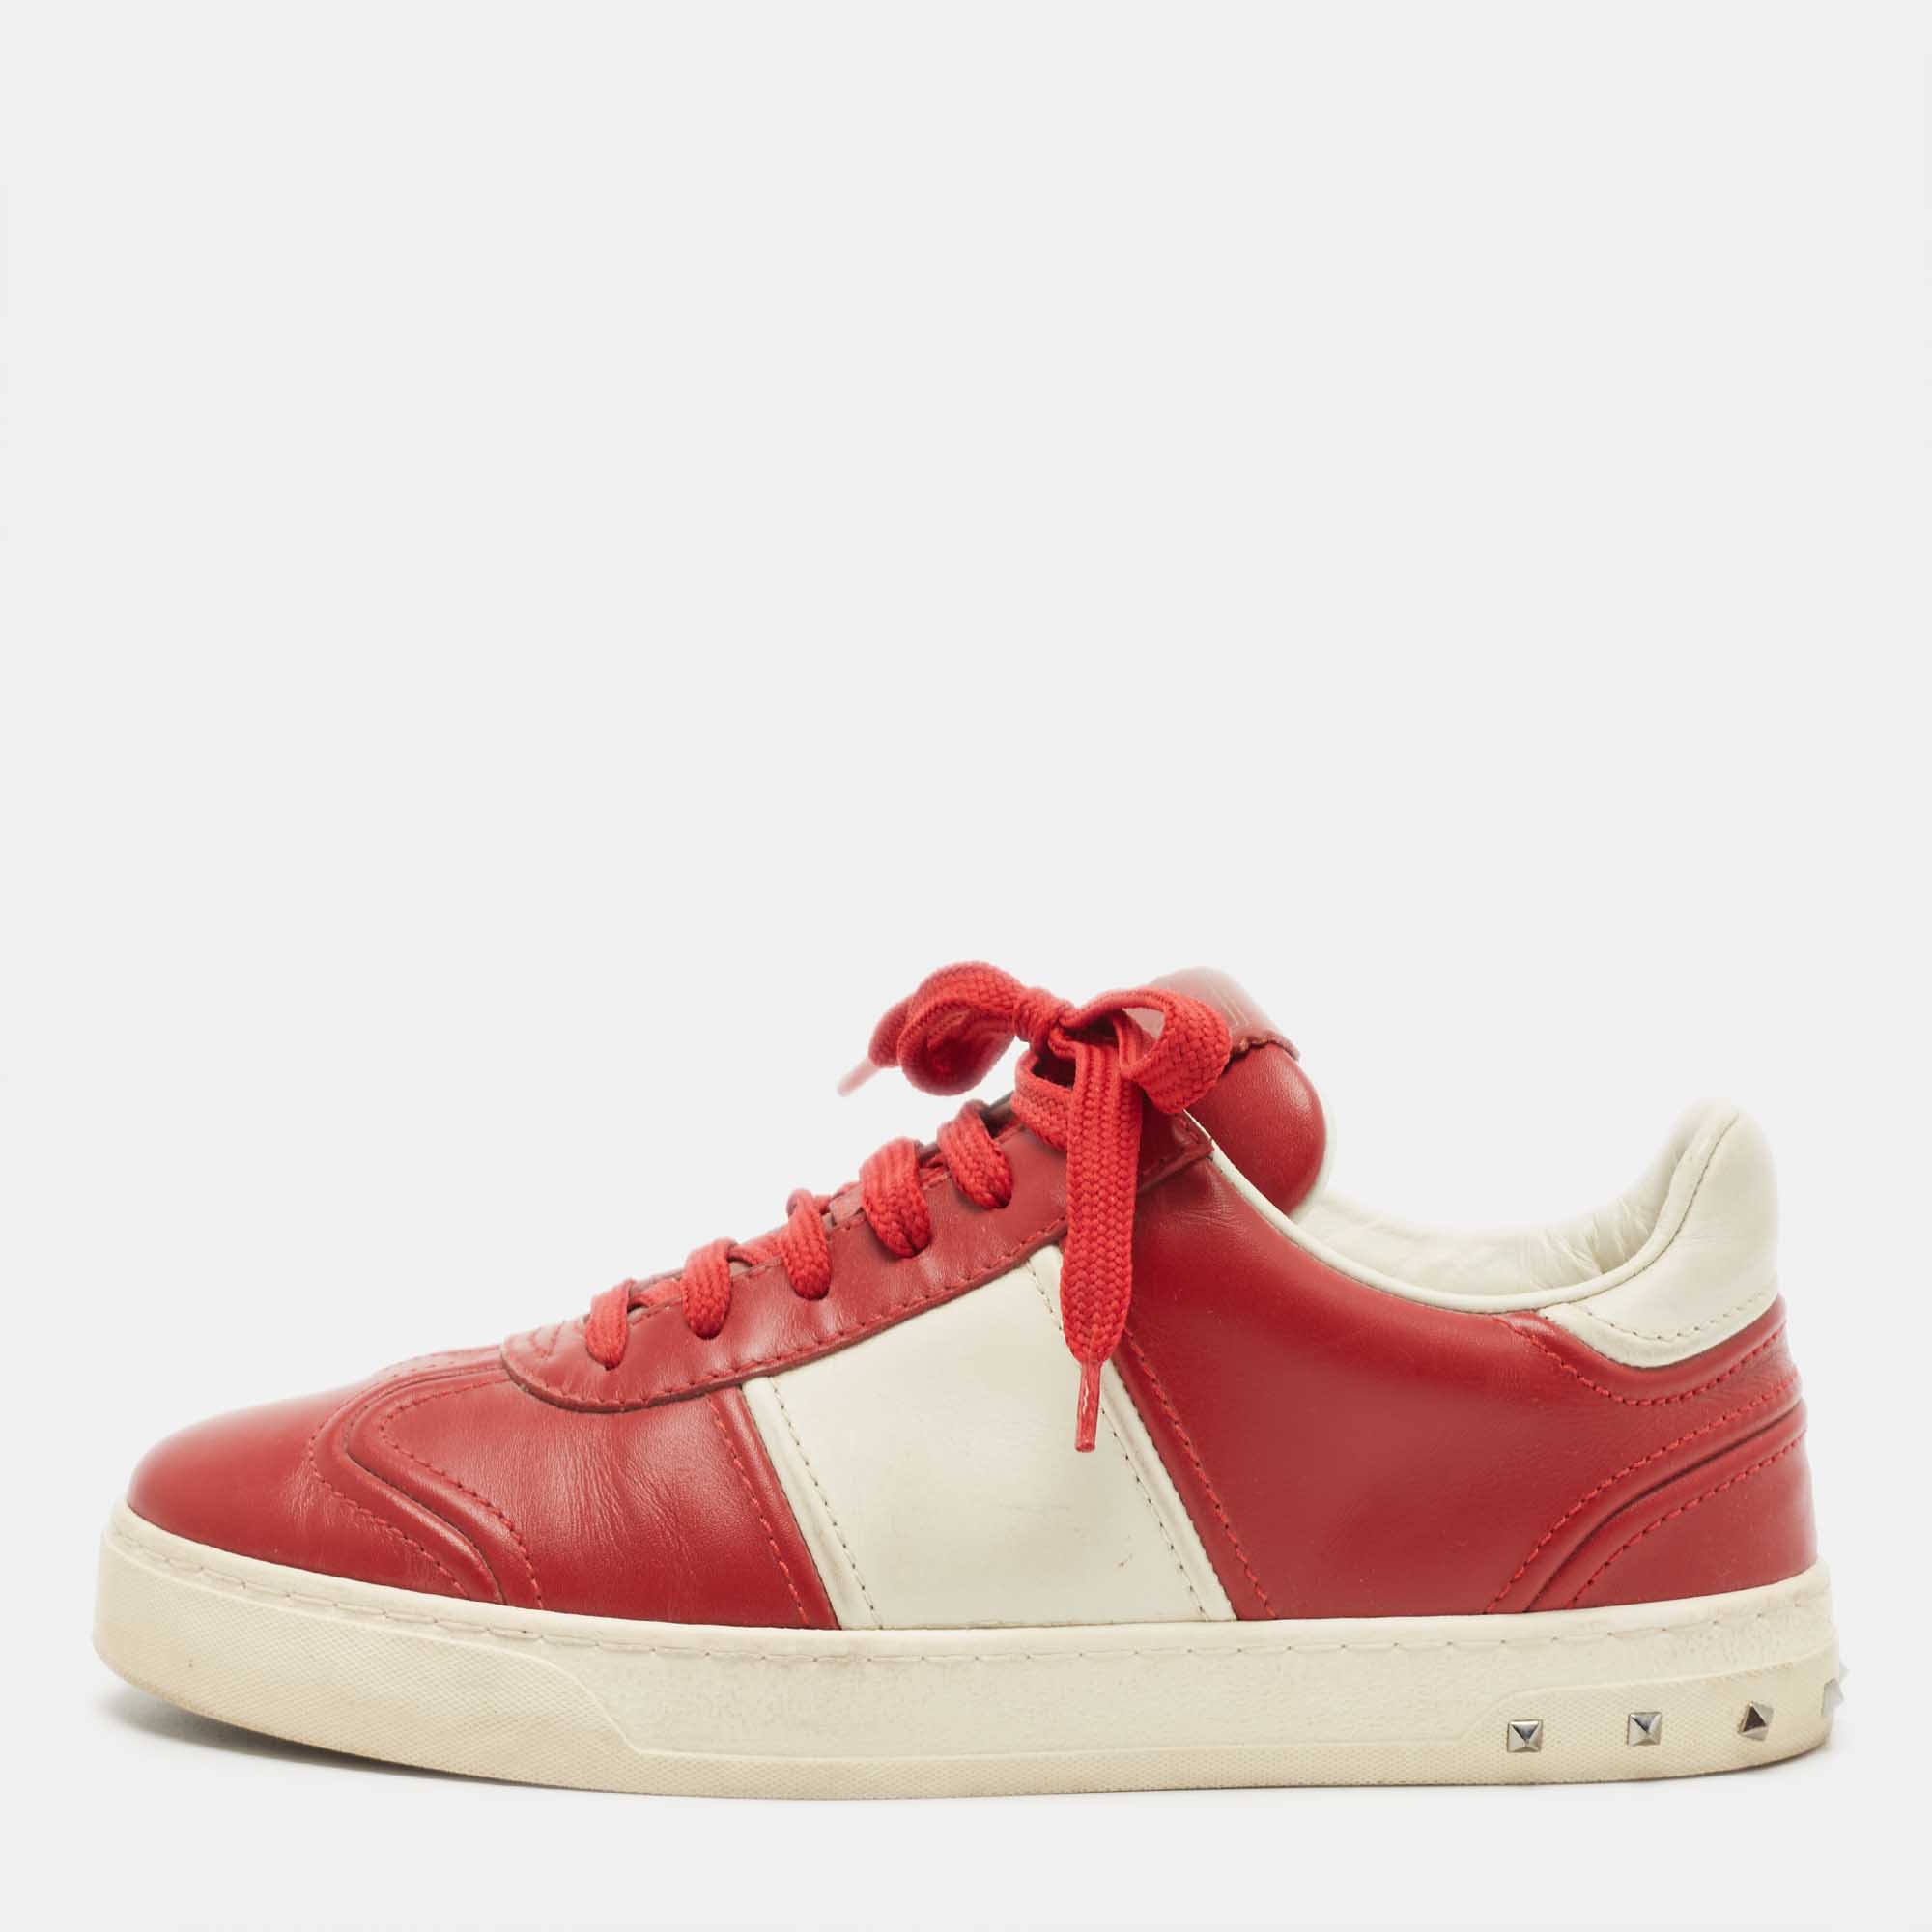 Pre-owned Valentino Garavani Red Leather Fly Crew Low Top Sneakers Size 38.5